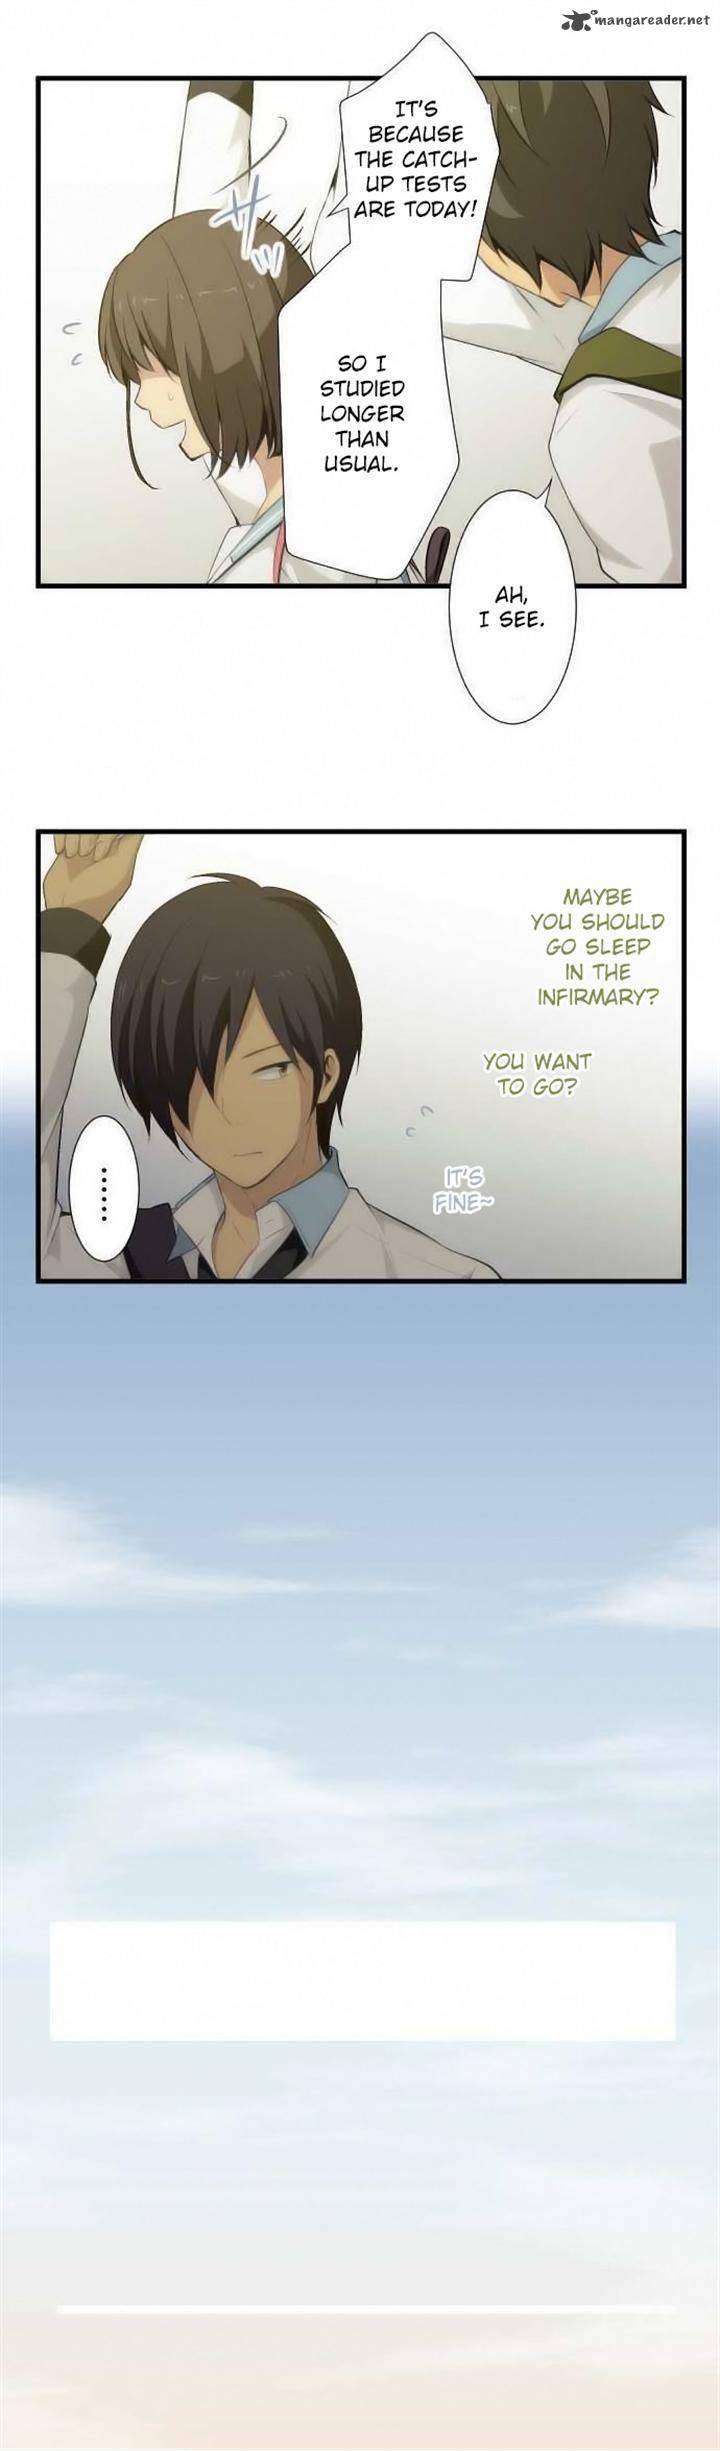 Relife 62 7